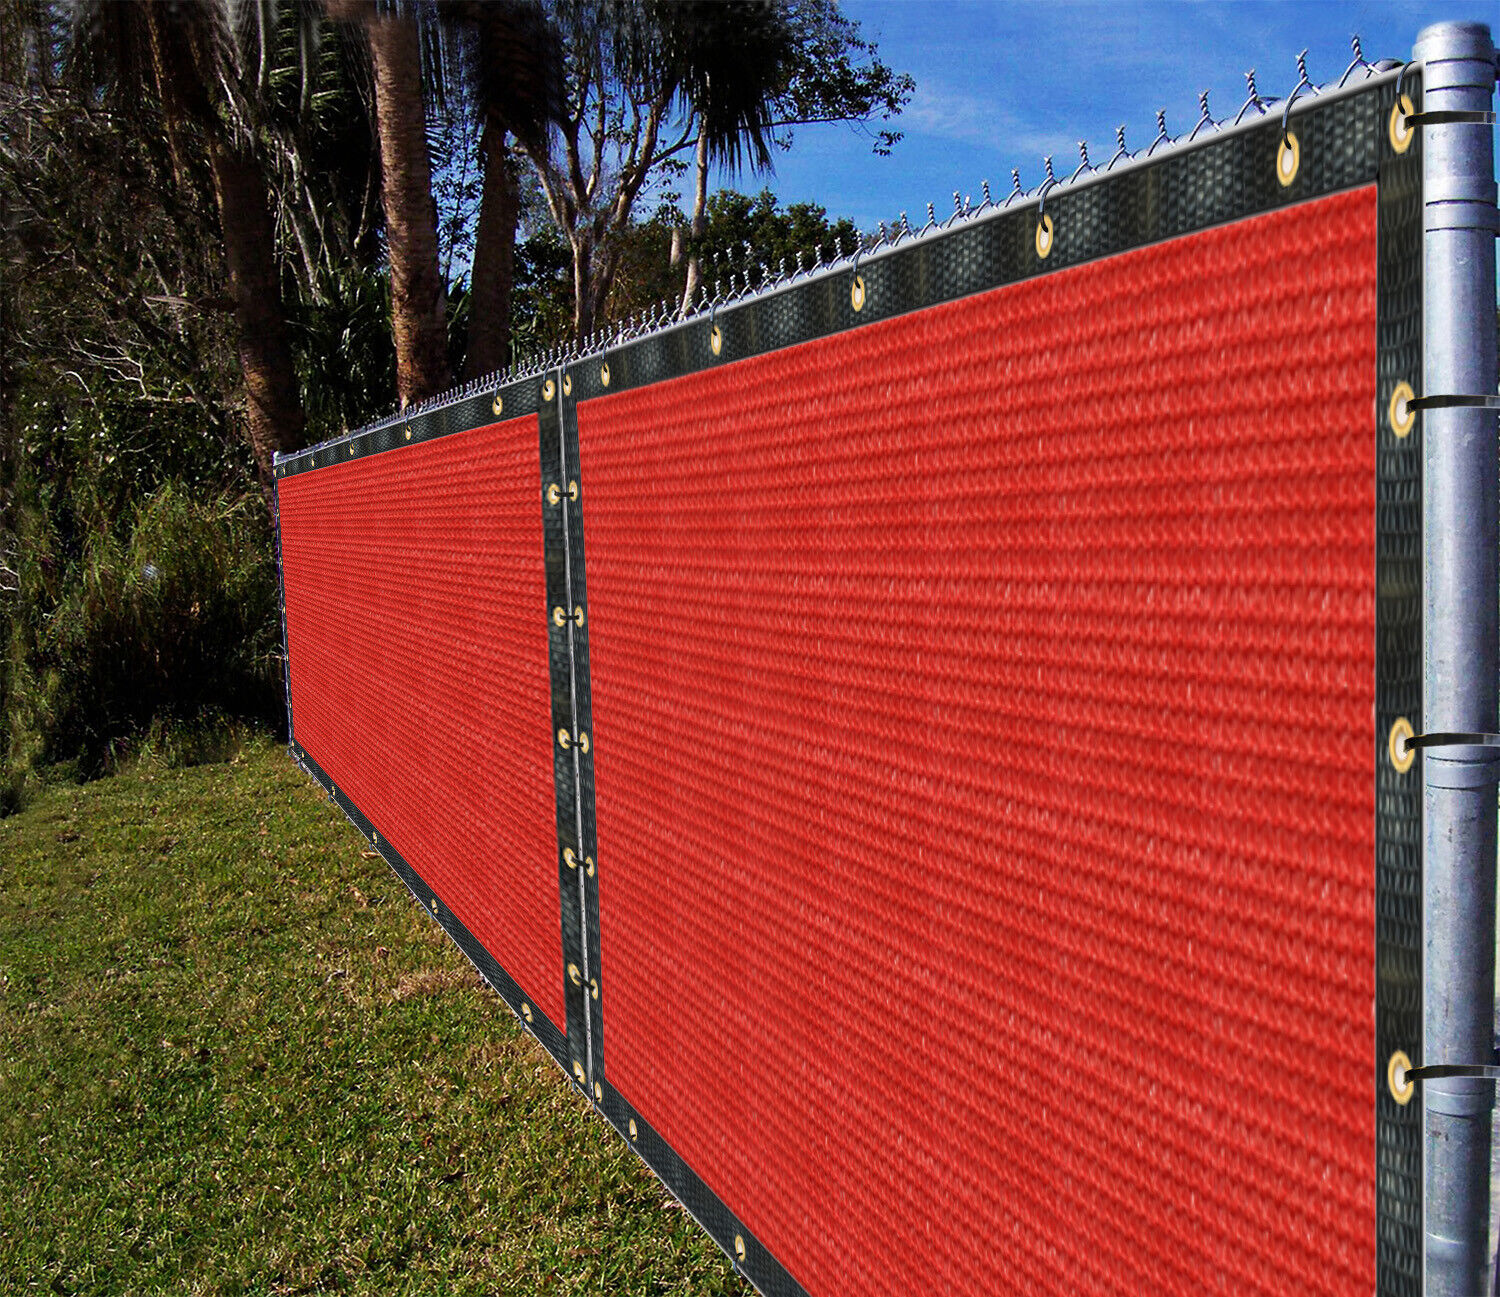 Ifenceview 15 FT Award-winning store Width Red Fence Privacy Canopy Pa Screen Awning Ranking TOP13